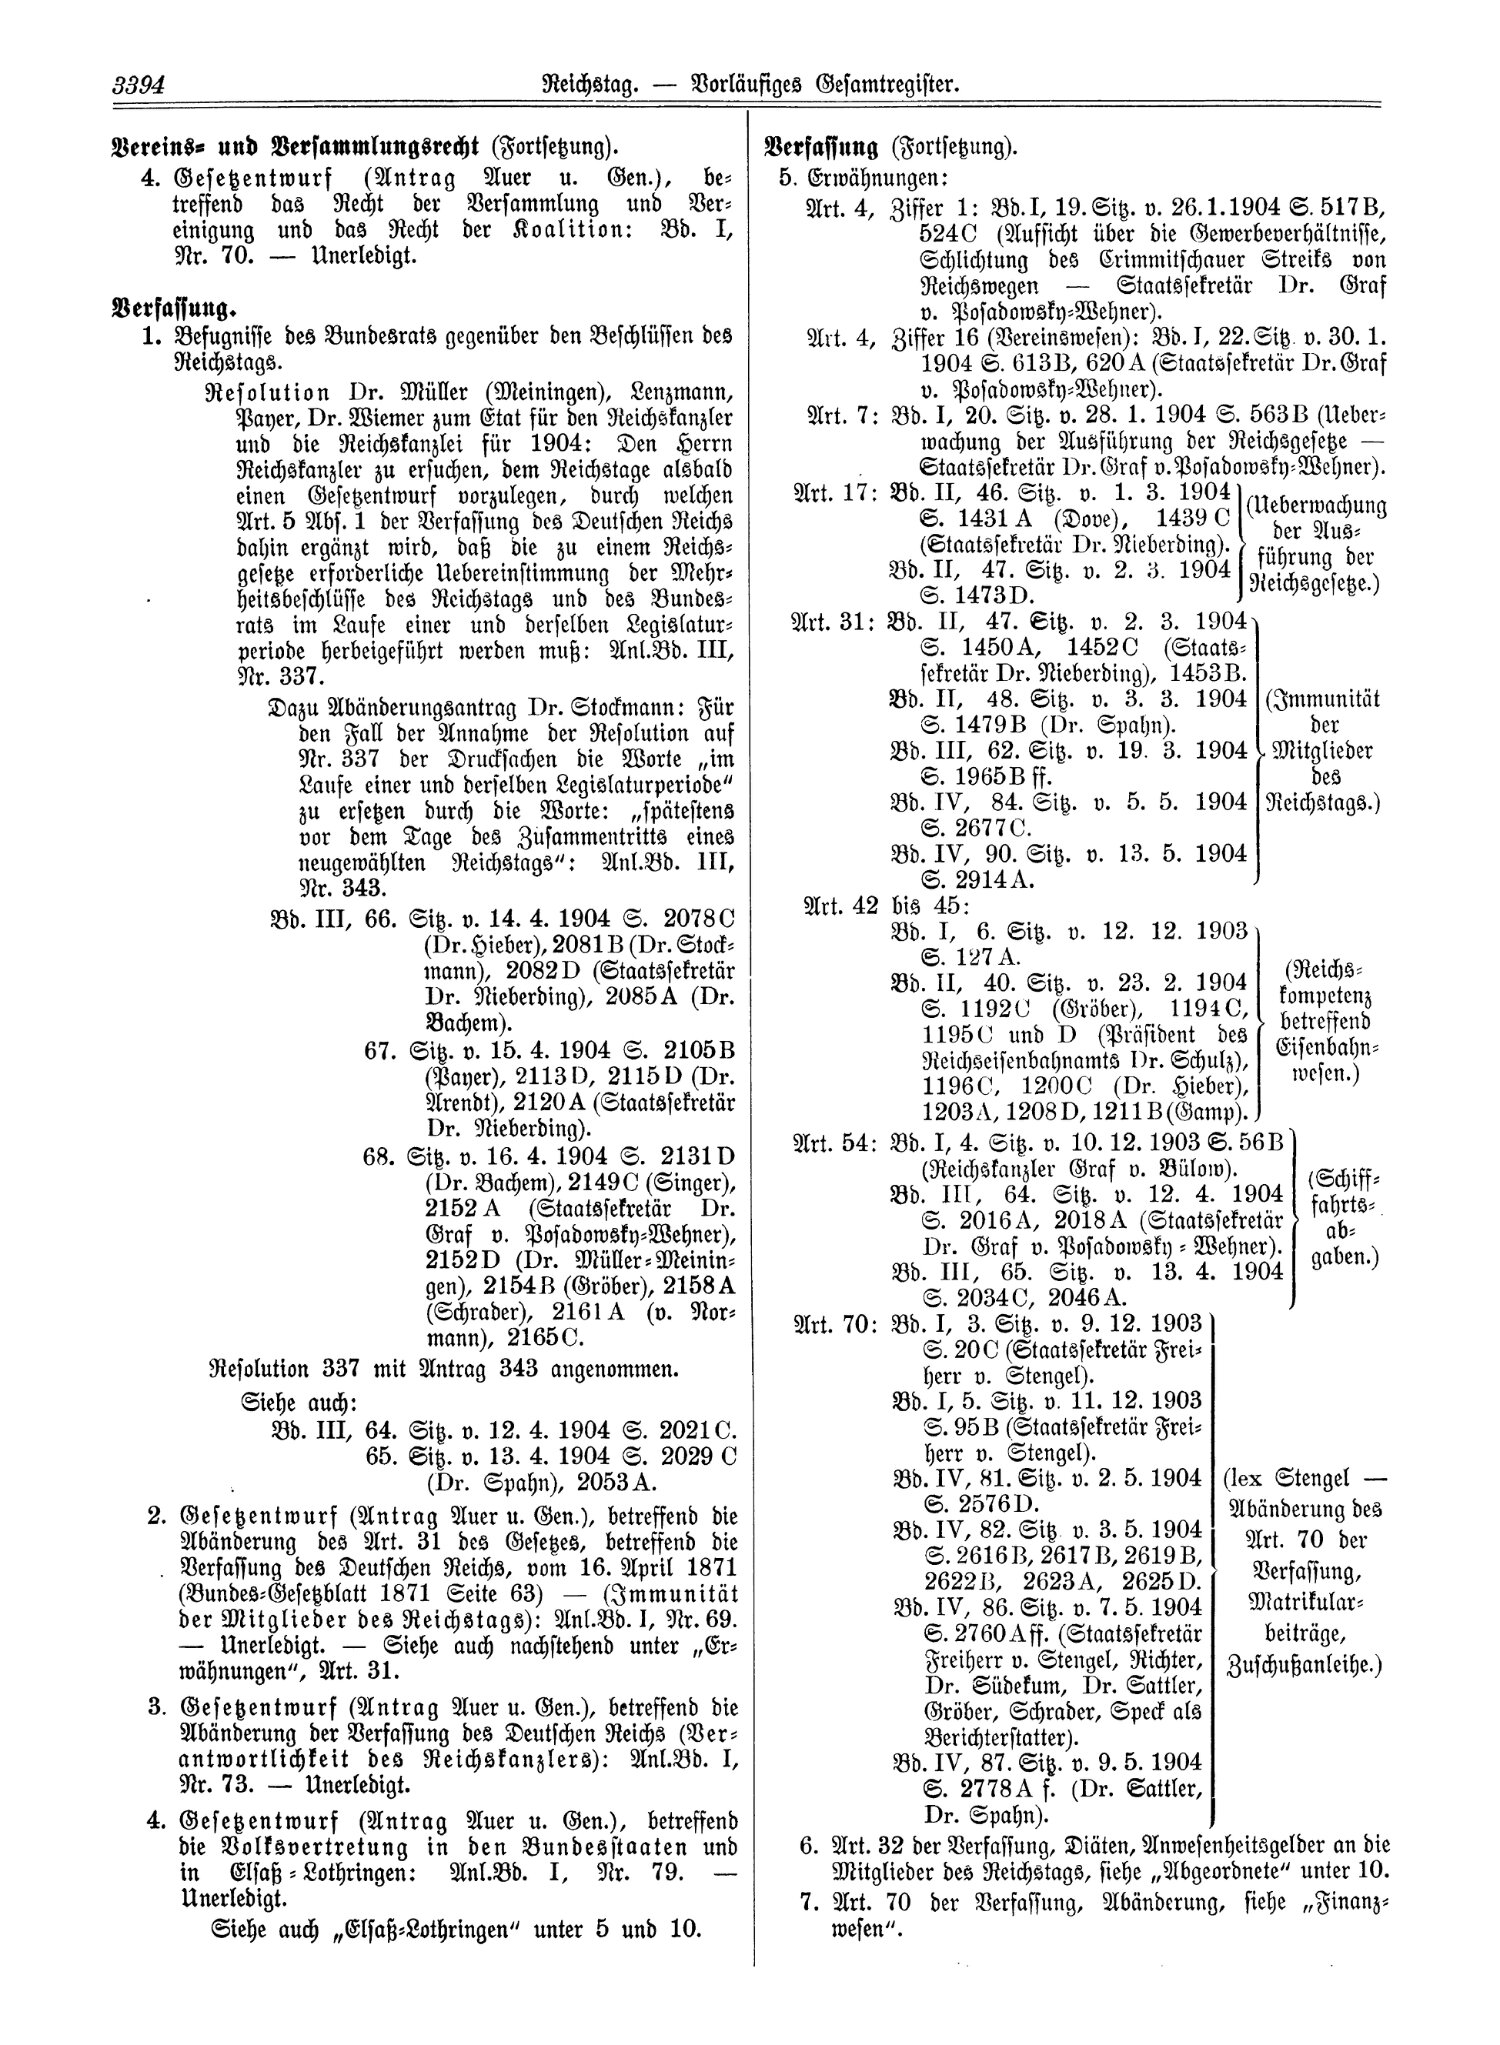 Scan of page 3394